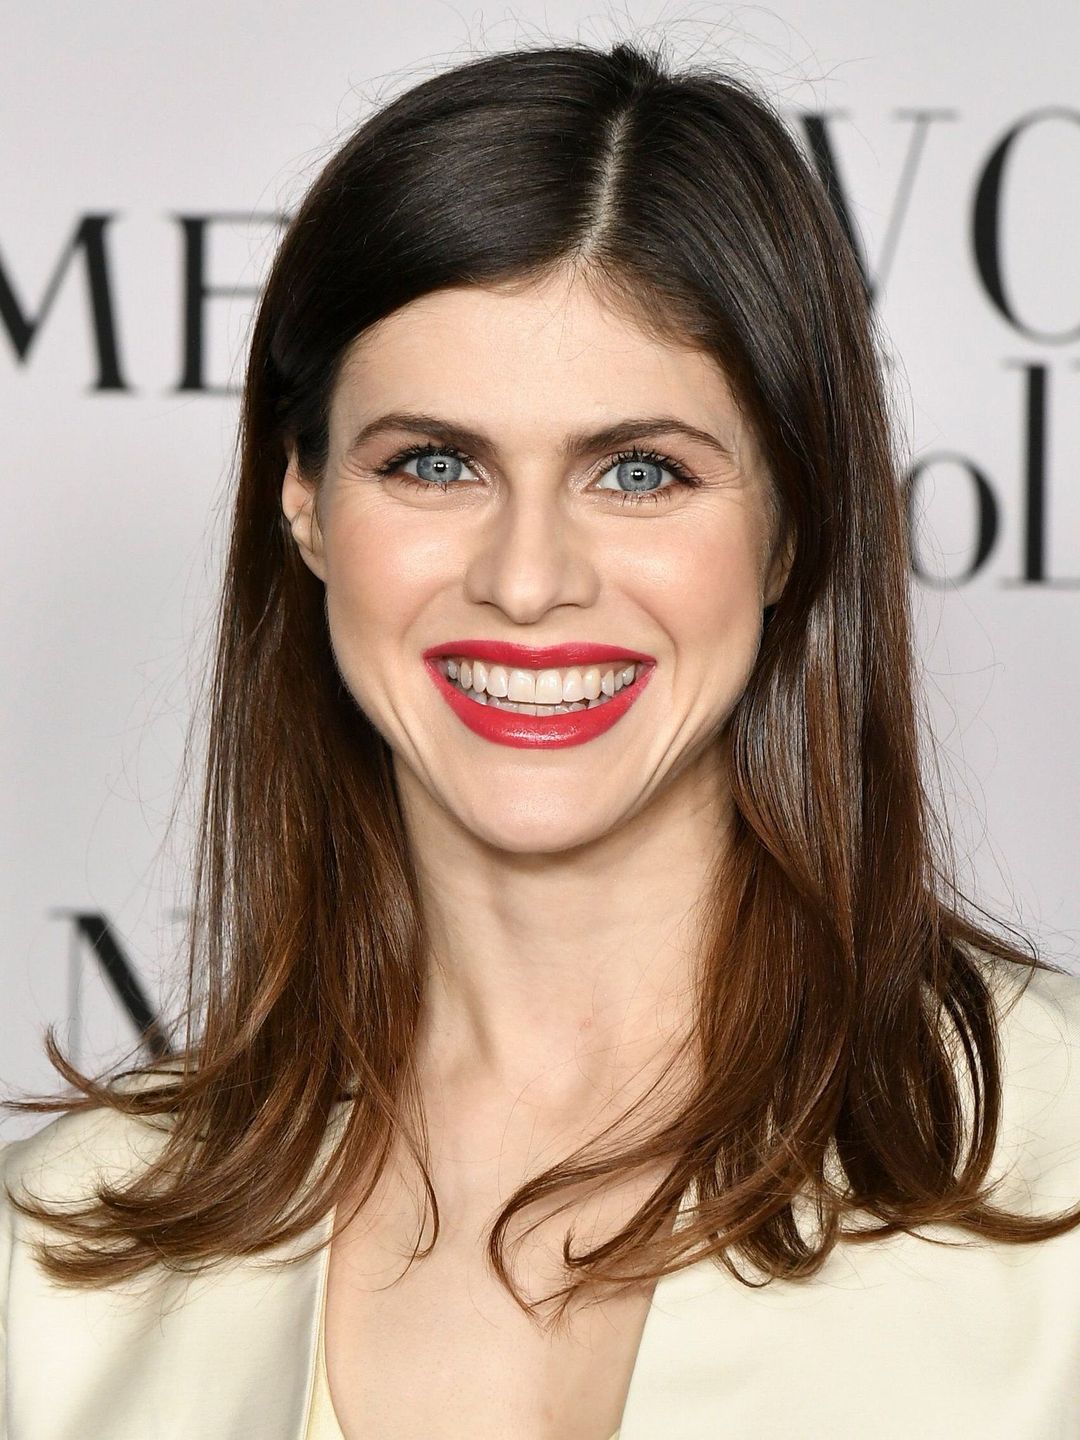 Alexandra Daddario who is her mother